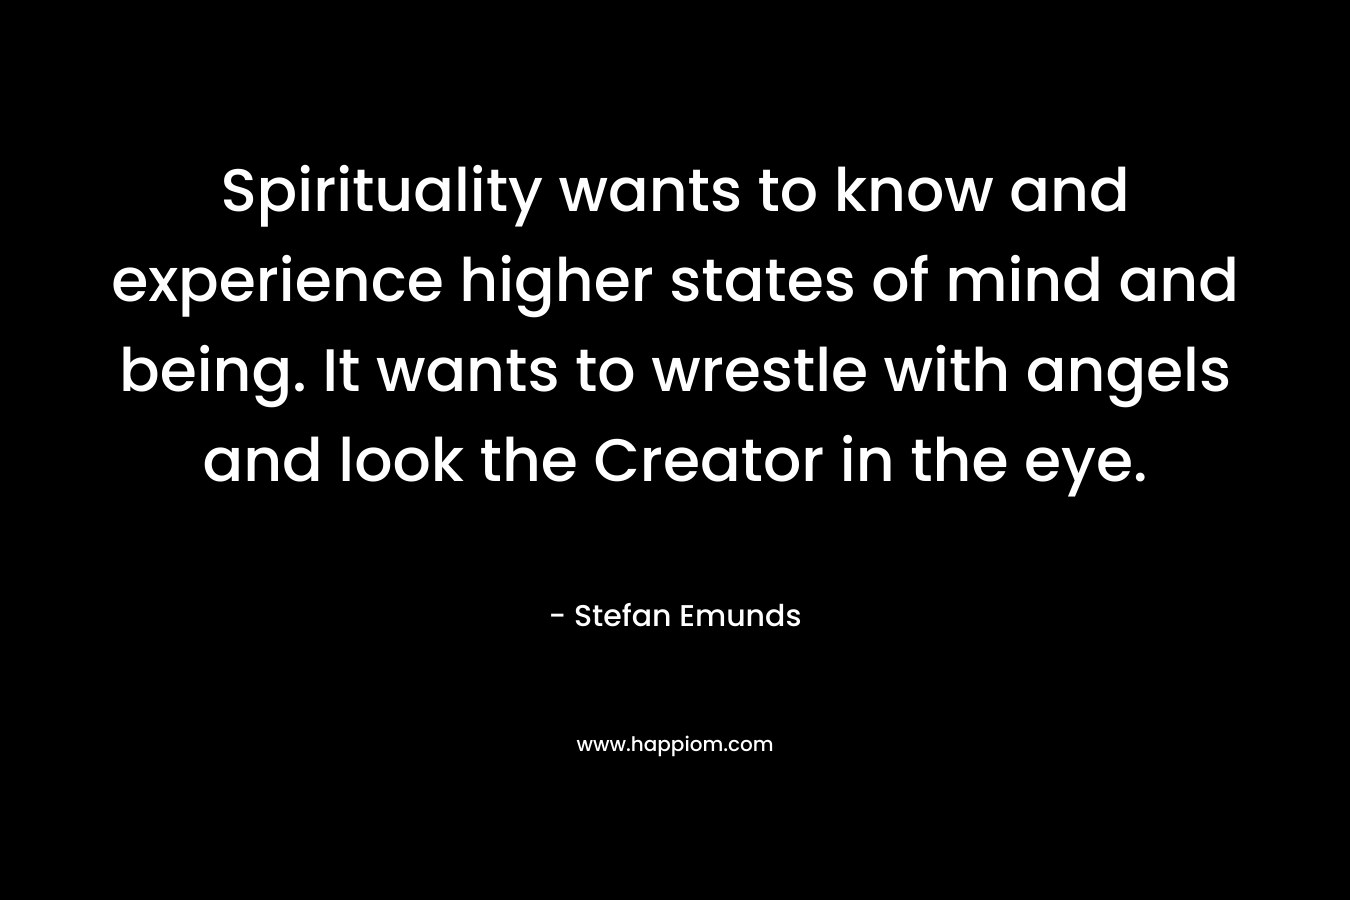 Spirituality wants to know and experience higher states of mind and being. It wants to wrestle with angels and look the Creator in the eye.